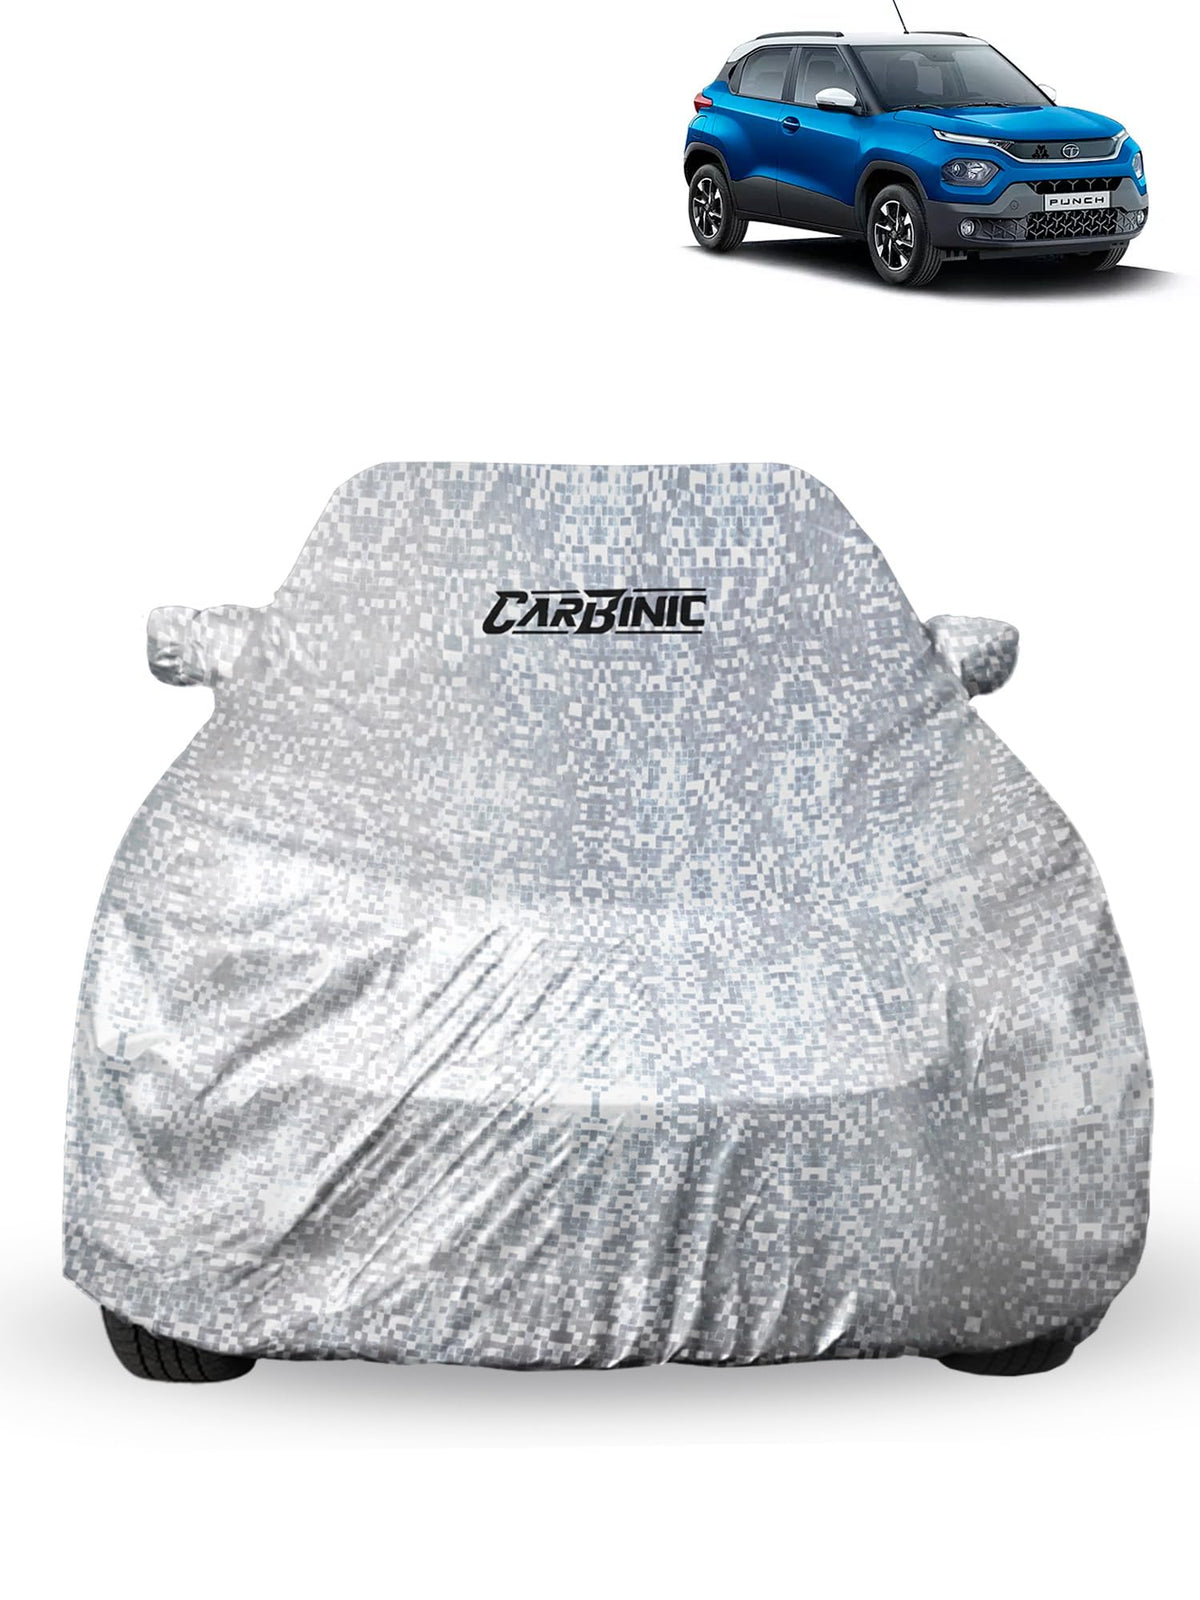 CARBINIC Car Cover for Tata Punch2021 Waterproof (Tested) and Dustproof Custom Fit UV Heat Resistant Outdoor Protection with Triple Stitched Fully Elastic Surface | Silver with Pockets